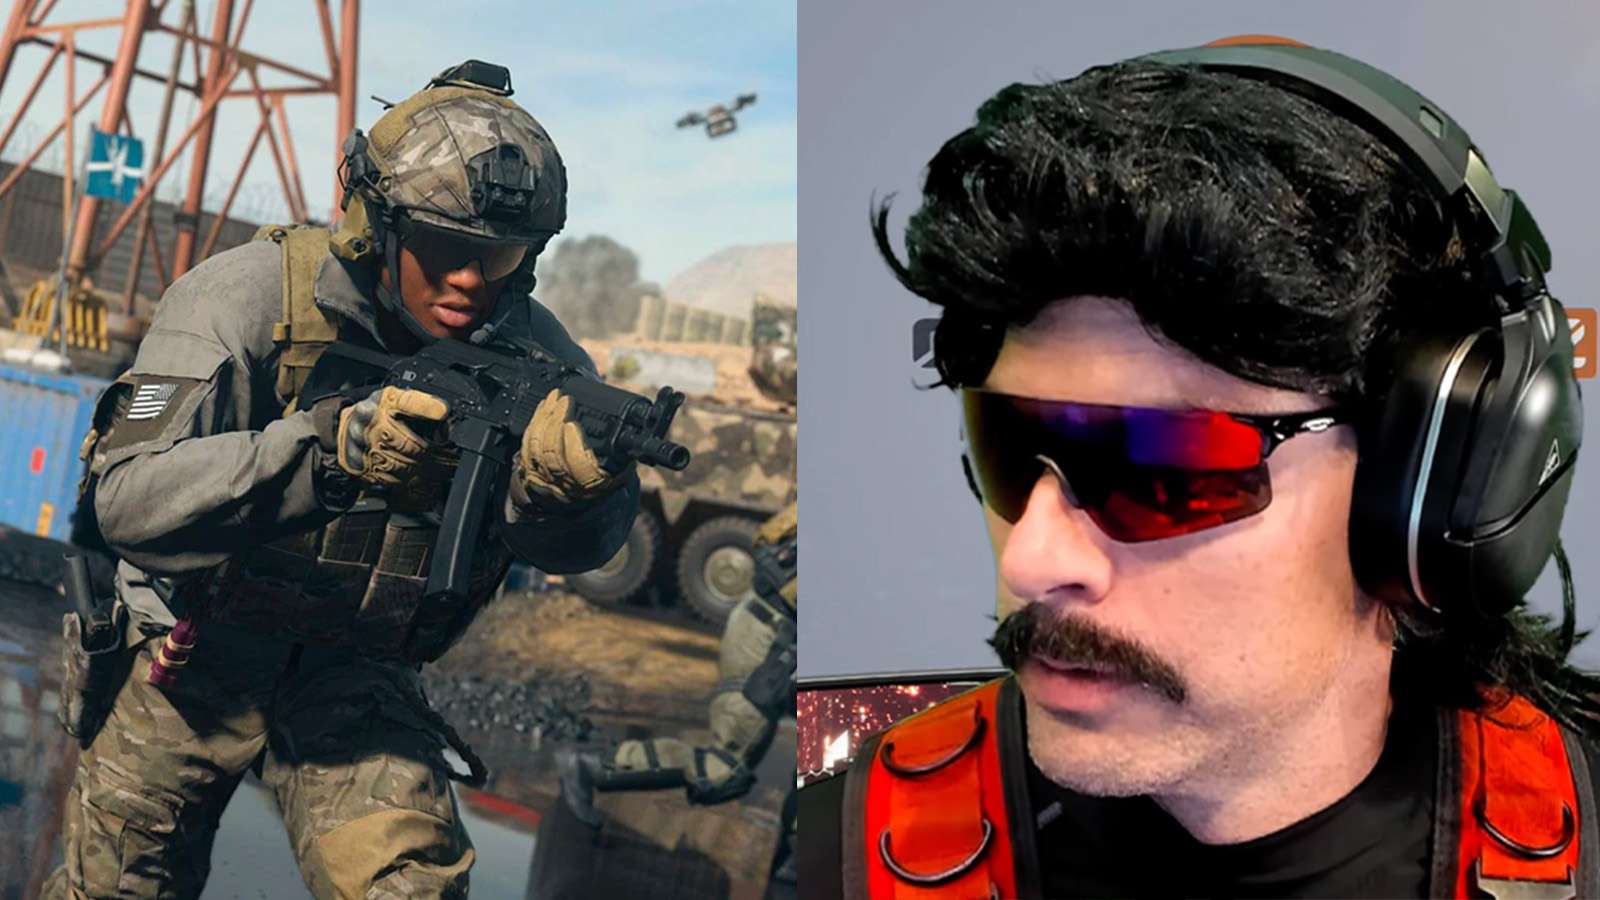 MW2 character next to Dr Disrespect